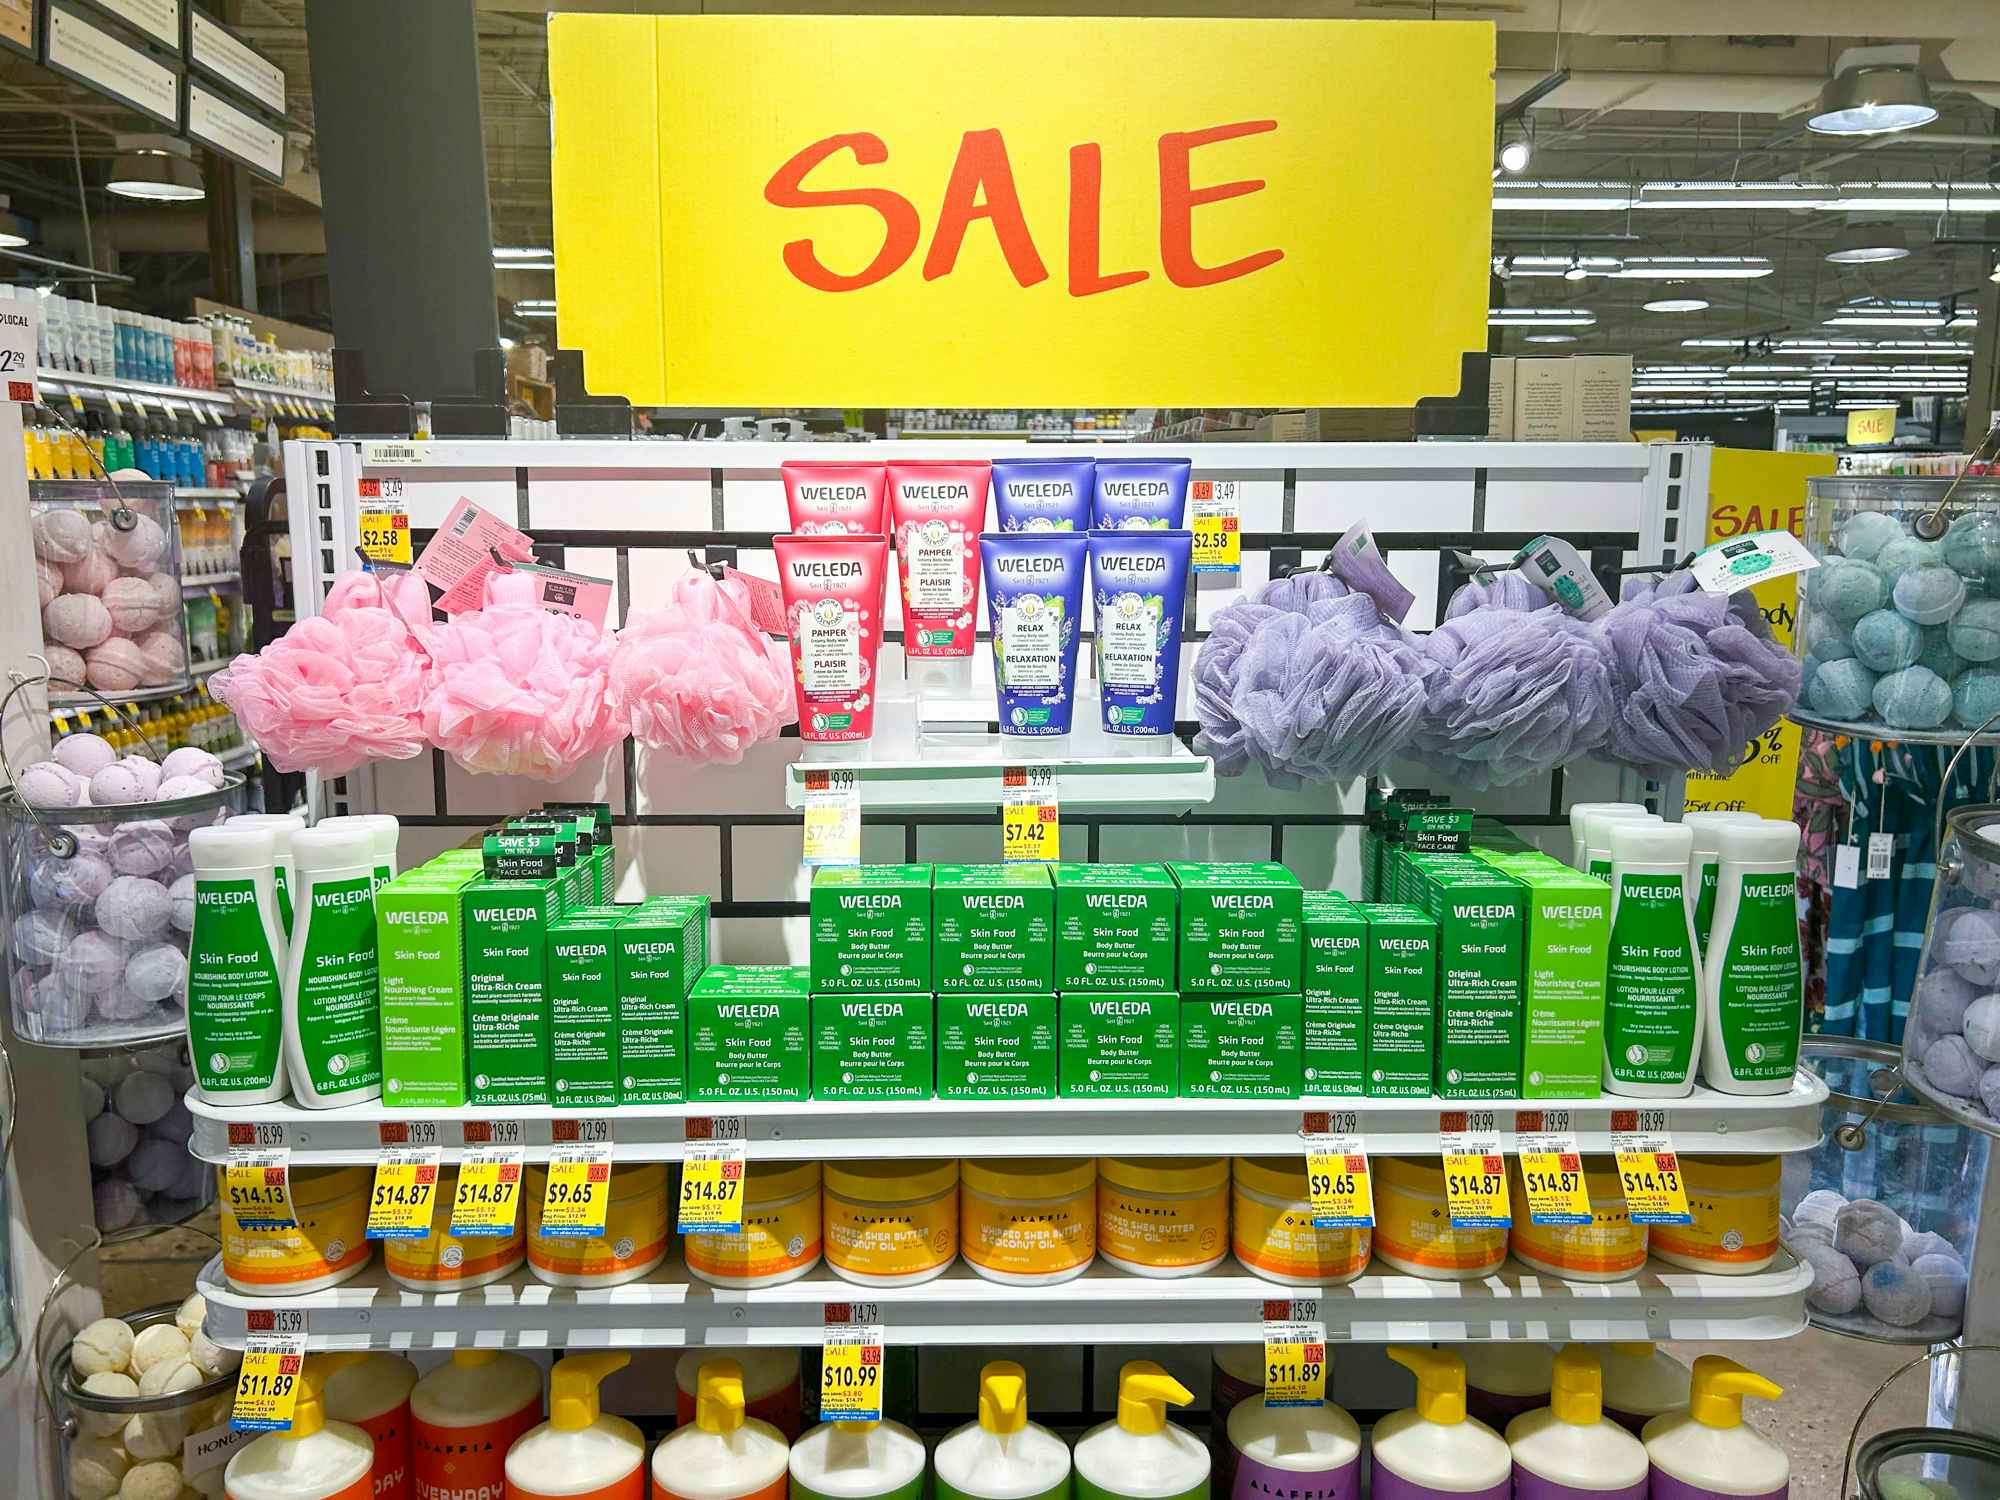 A shelf of body care items in Whole Foods with large SALE signs